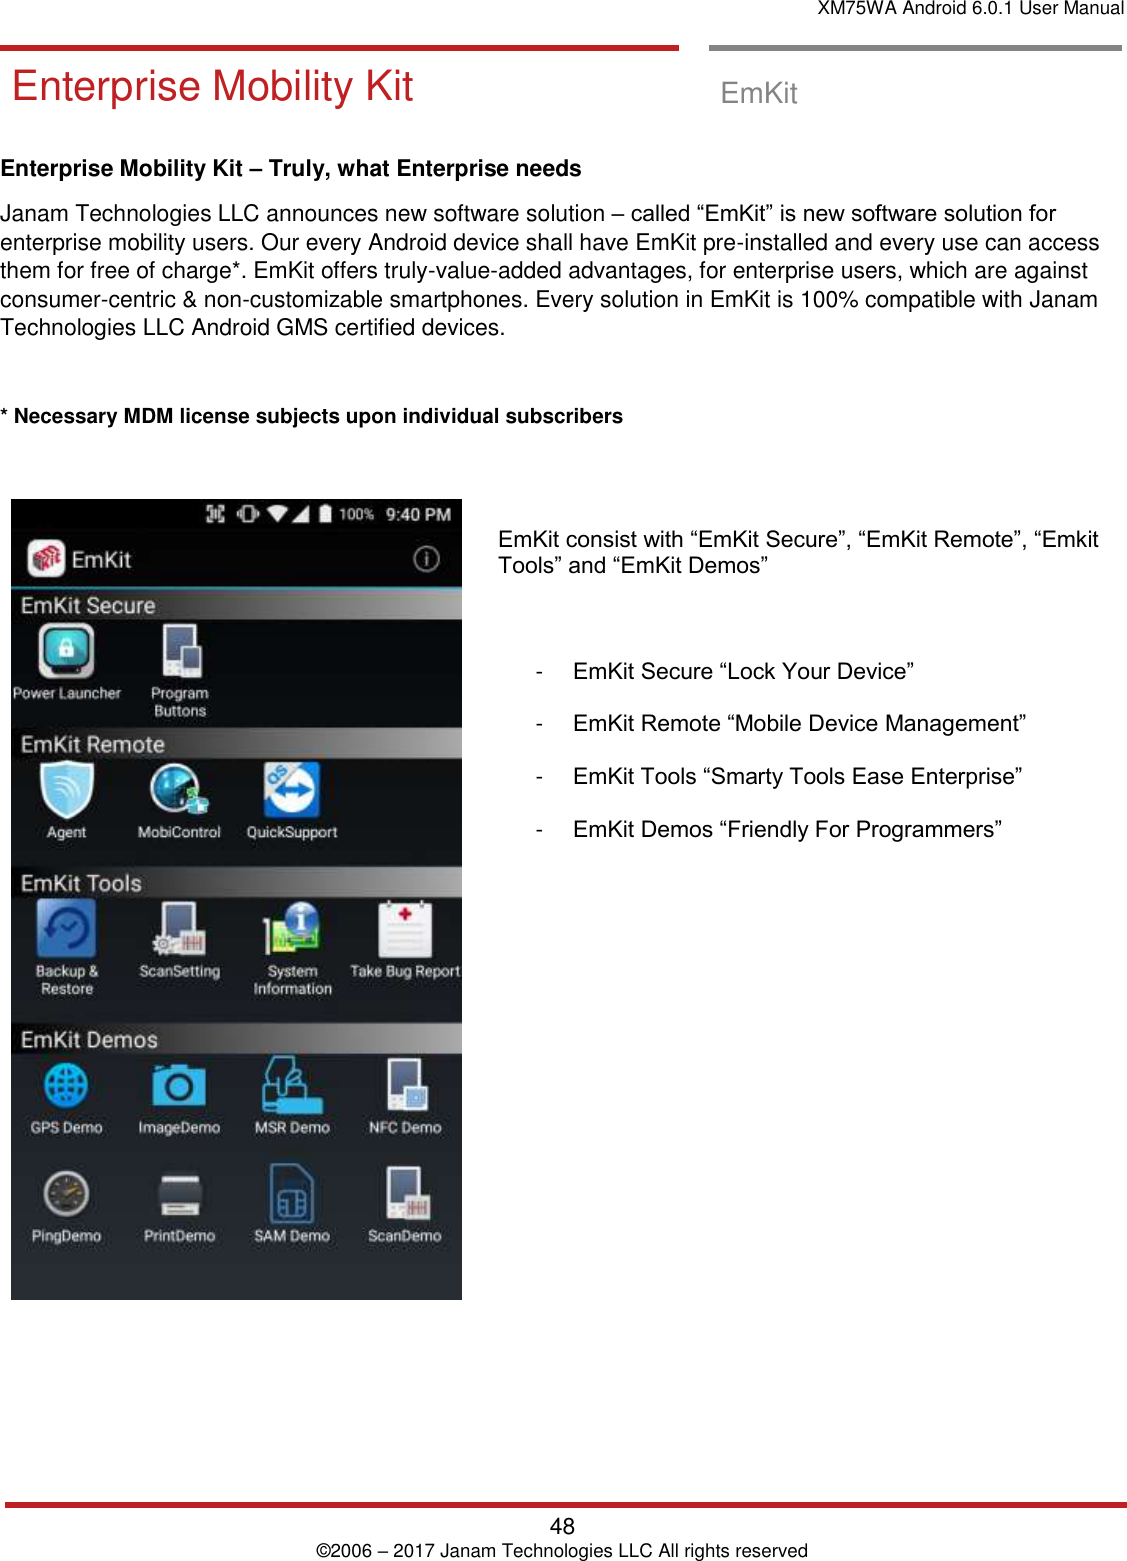 XM75WA Android 6.0.1 User Manual   48 © 2006 – 2017 Janam Technologies LLC All rights reserved  EmKit Enterprise Mobility Kit  EmKit  Enterprise Mobility Kit – Truly, what Enterprise needs Janam Technologies LLC announces new software solution – called “EmKit” is new software solution for enterprise mobility users. Our every Android device shall have EmKit pre-installed and every use can access them for free of charge*. EmKit offers truly-value-added advantages, for enterprise users, which are against consumer-centric &amp; non-customizable smartphones. Every solution in EmKit is 100% compatible with Janam Technologies LLC Android GMS certified devices.  * Necessary MDM license subjects upon individual subscribers        EmKit consist with “EmKit Secure”, “EmKit Remote”, “Emkit Tools” and “EmKit Demos”    -  EmKit Secure “Lock Your Device”  -  EmKit Remote “Mobile Device Management”  -  EmKit Tools “Smarty Tools Ease Enterprise”  -  EmKit Demos “Friendly For Programmers”                   